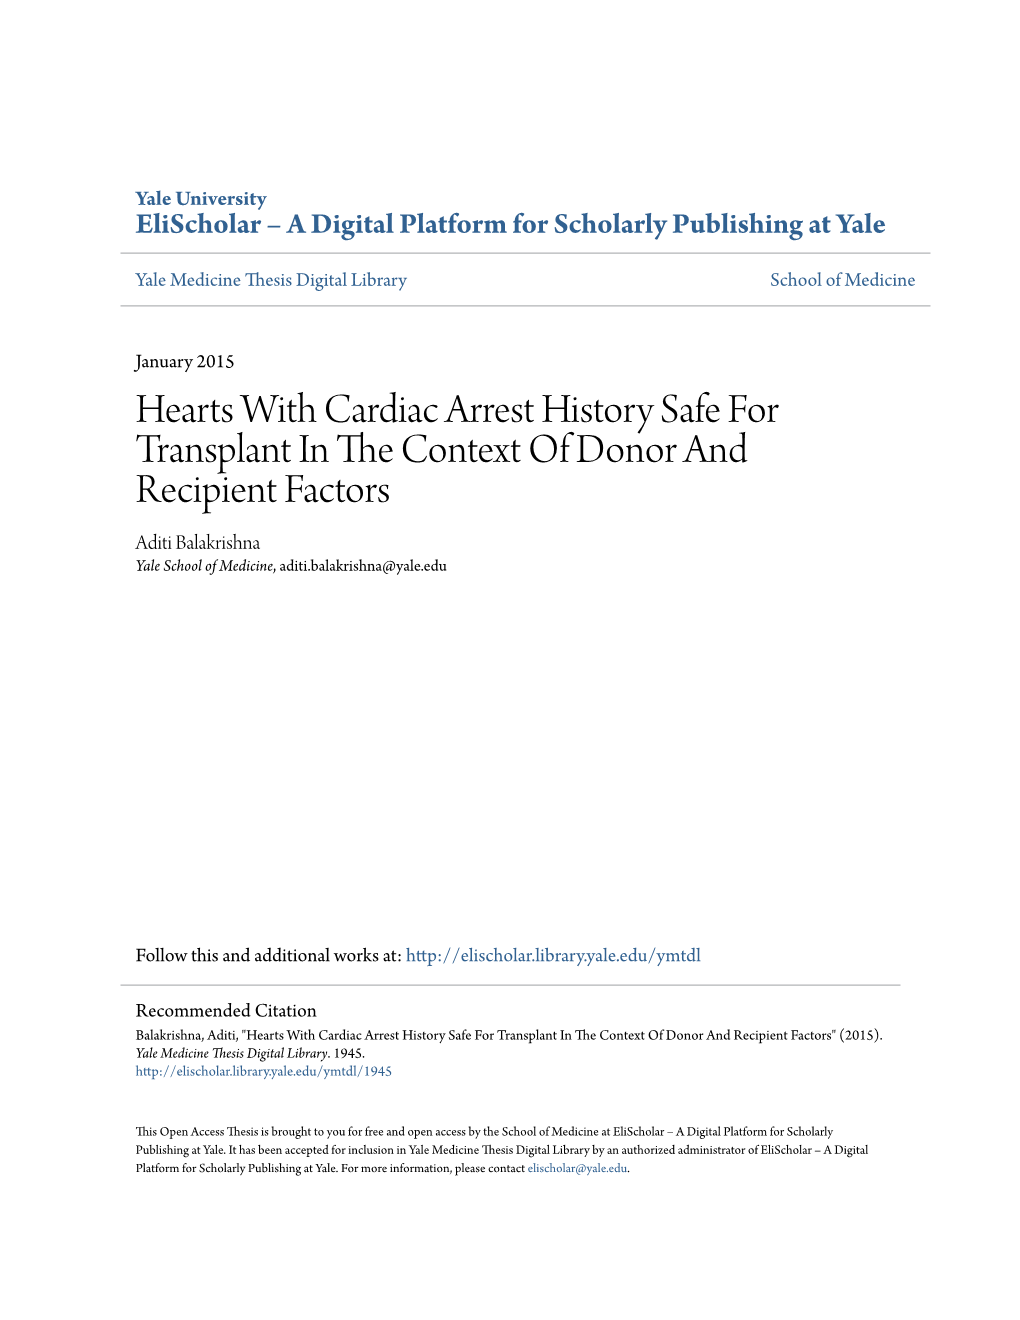 Hearts with Cardiac Arrest History Safe for Transplant in the Context Of